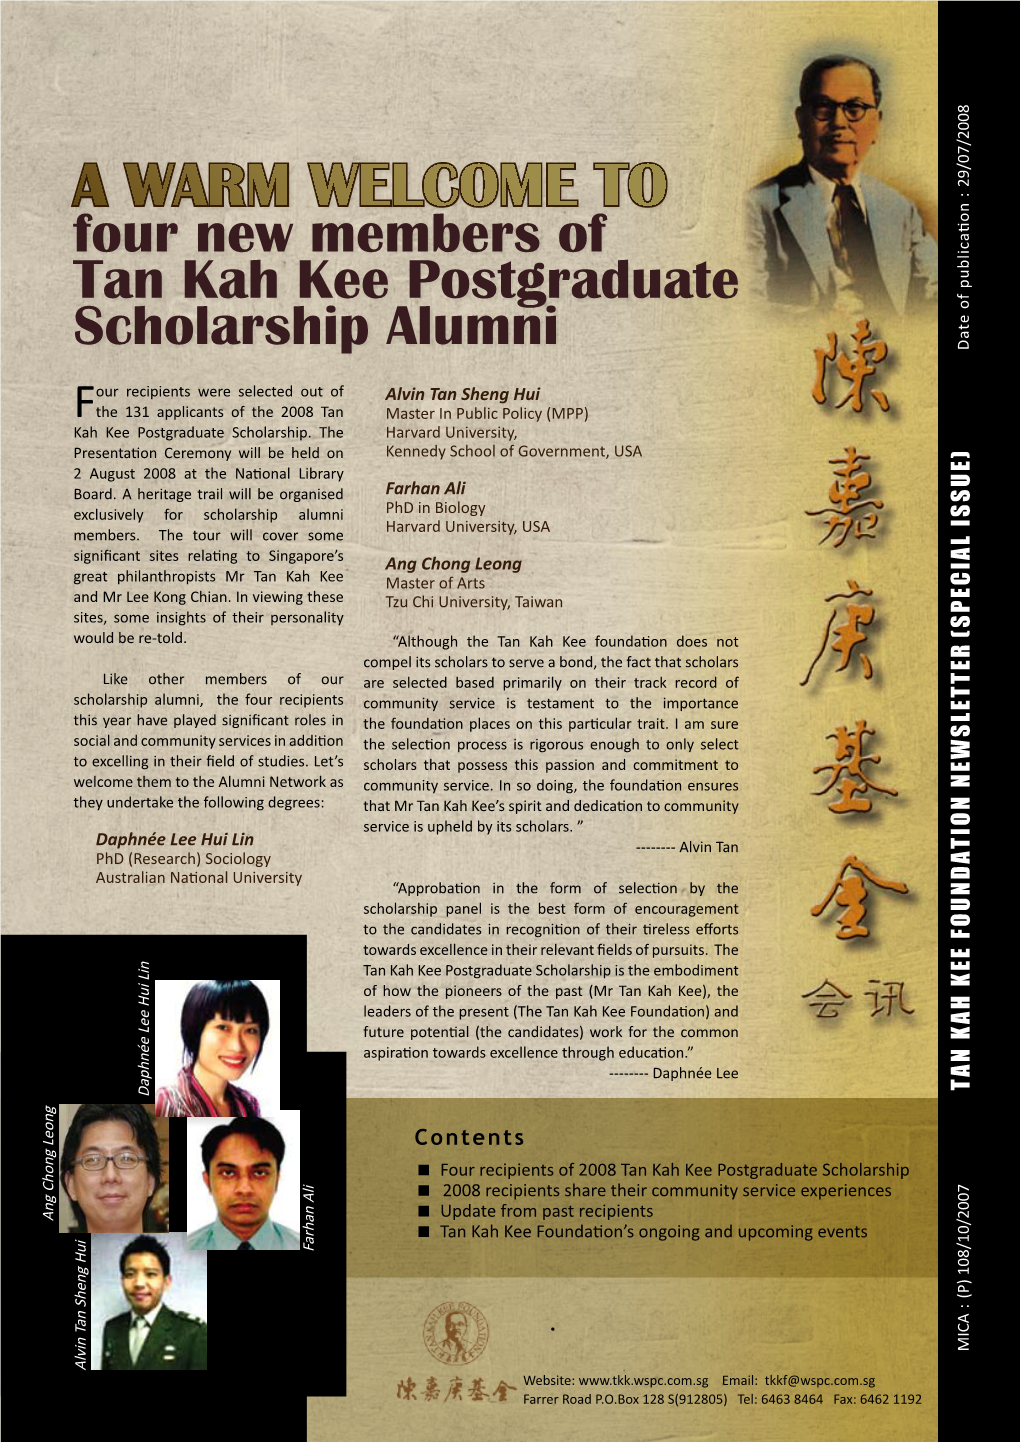 A Warm Welcome to Four New Members of Tan Kah Kee Postgraduate